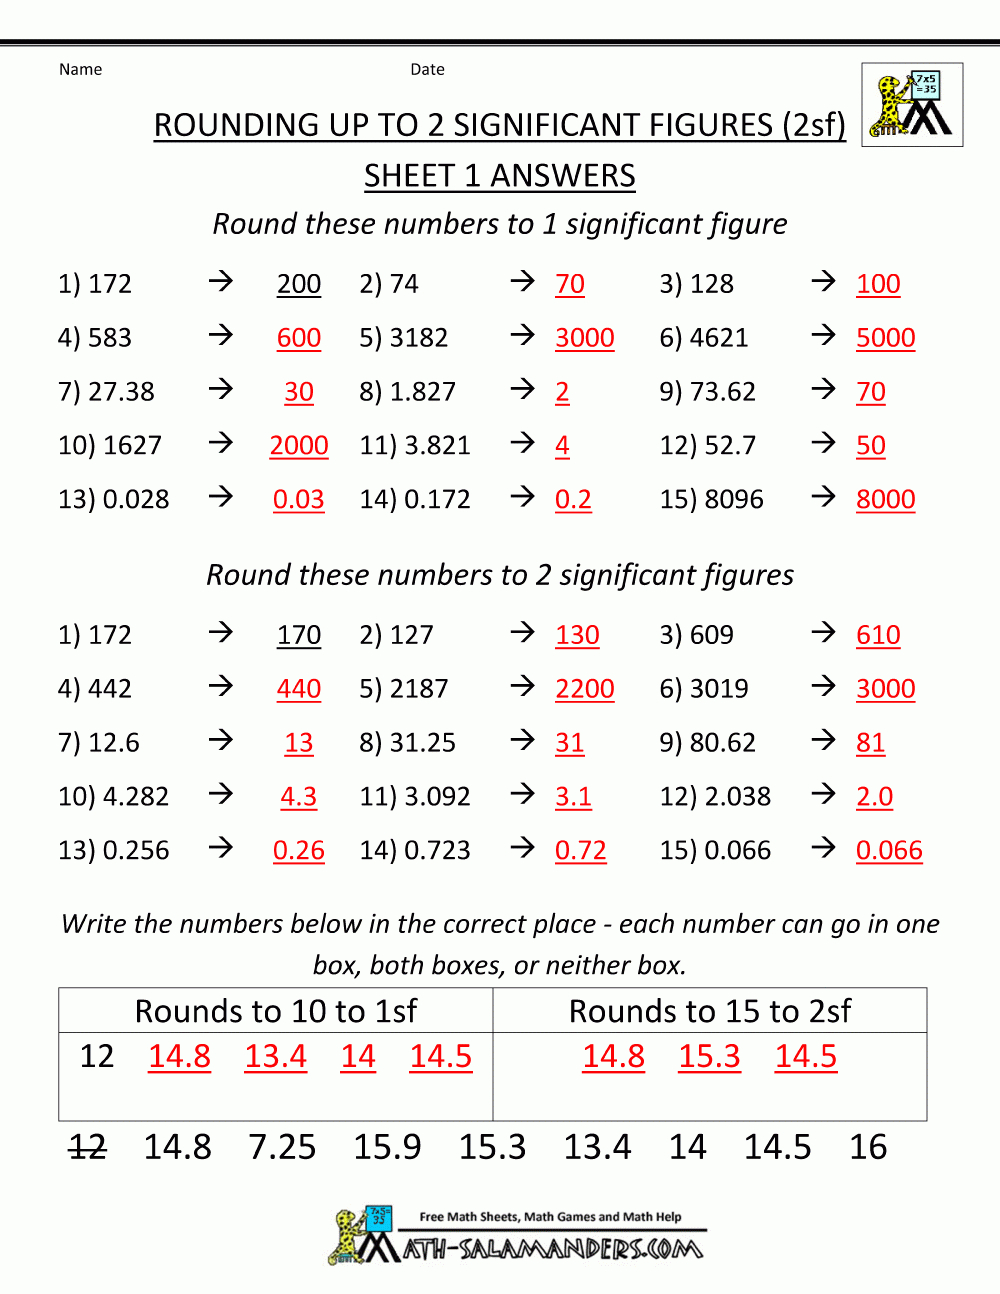 Rounding Significant Figures With Significant Figures Practice Worksheet Answer Key